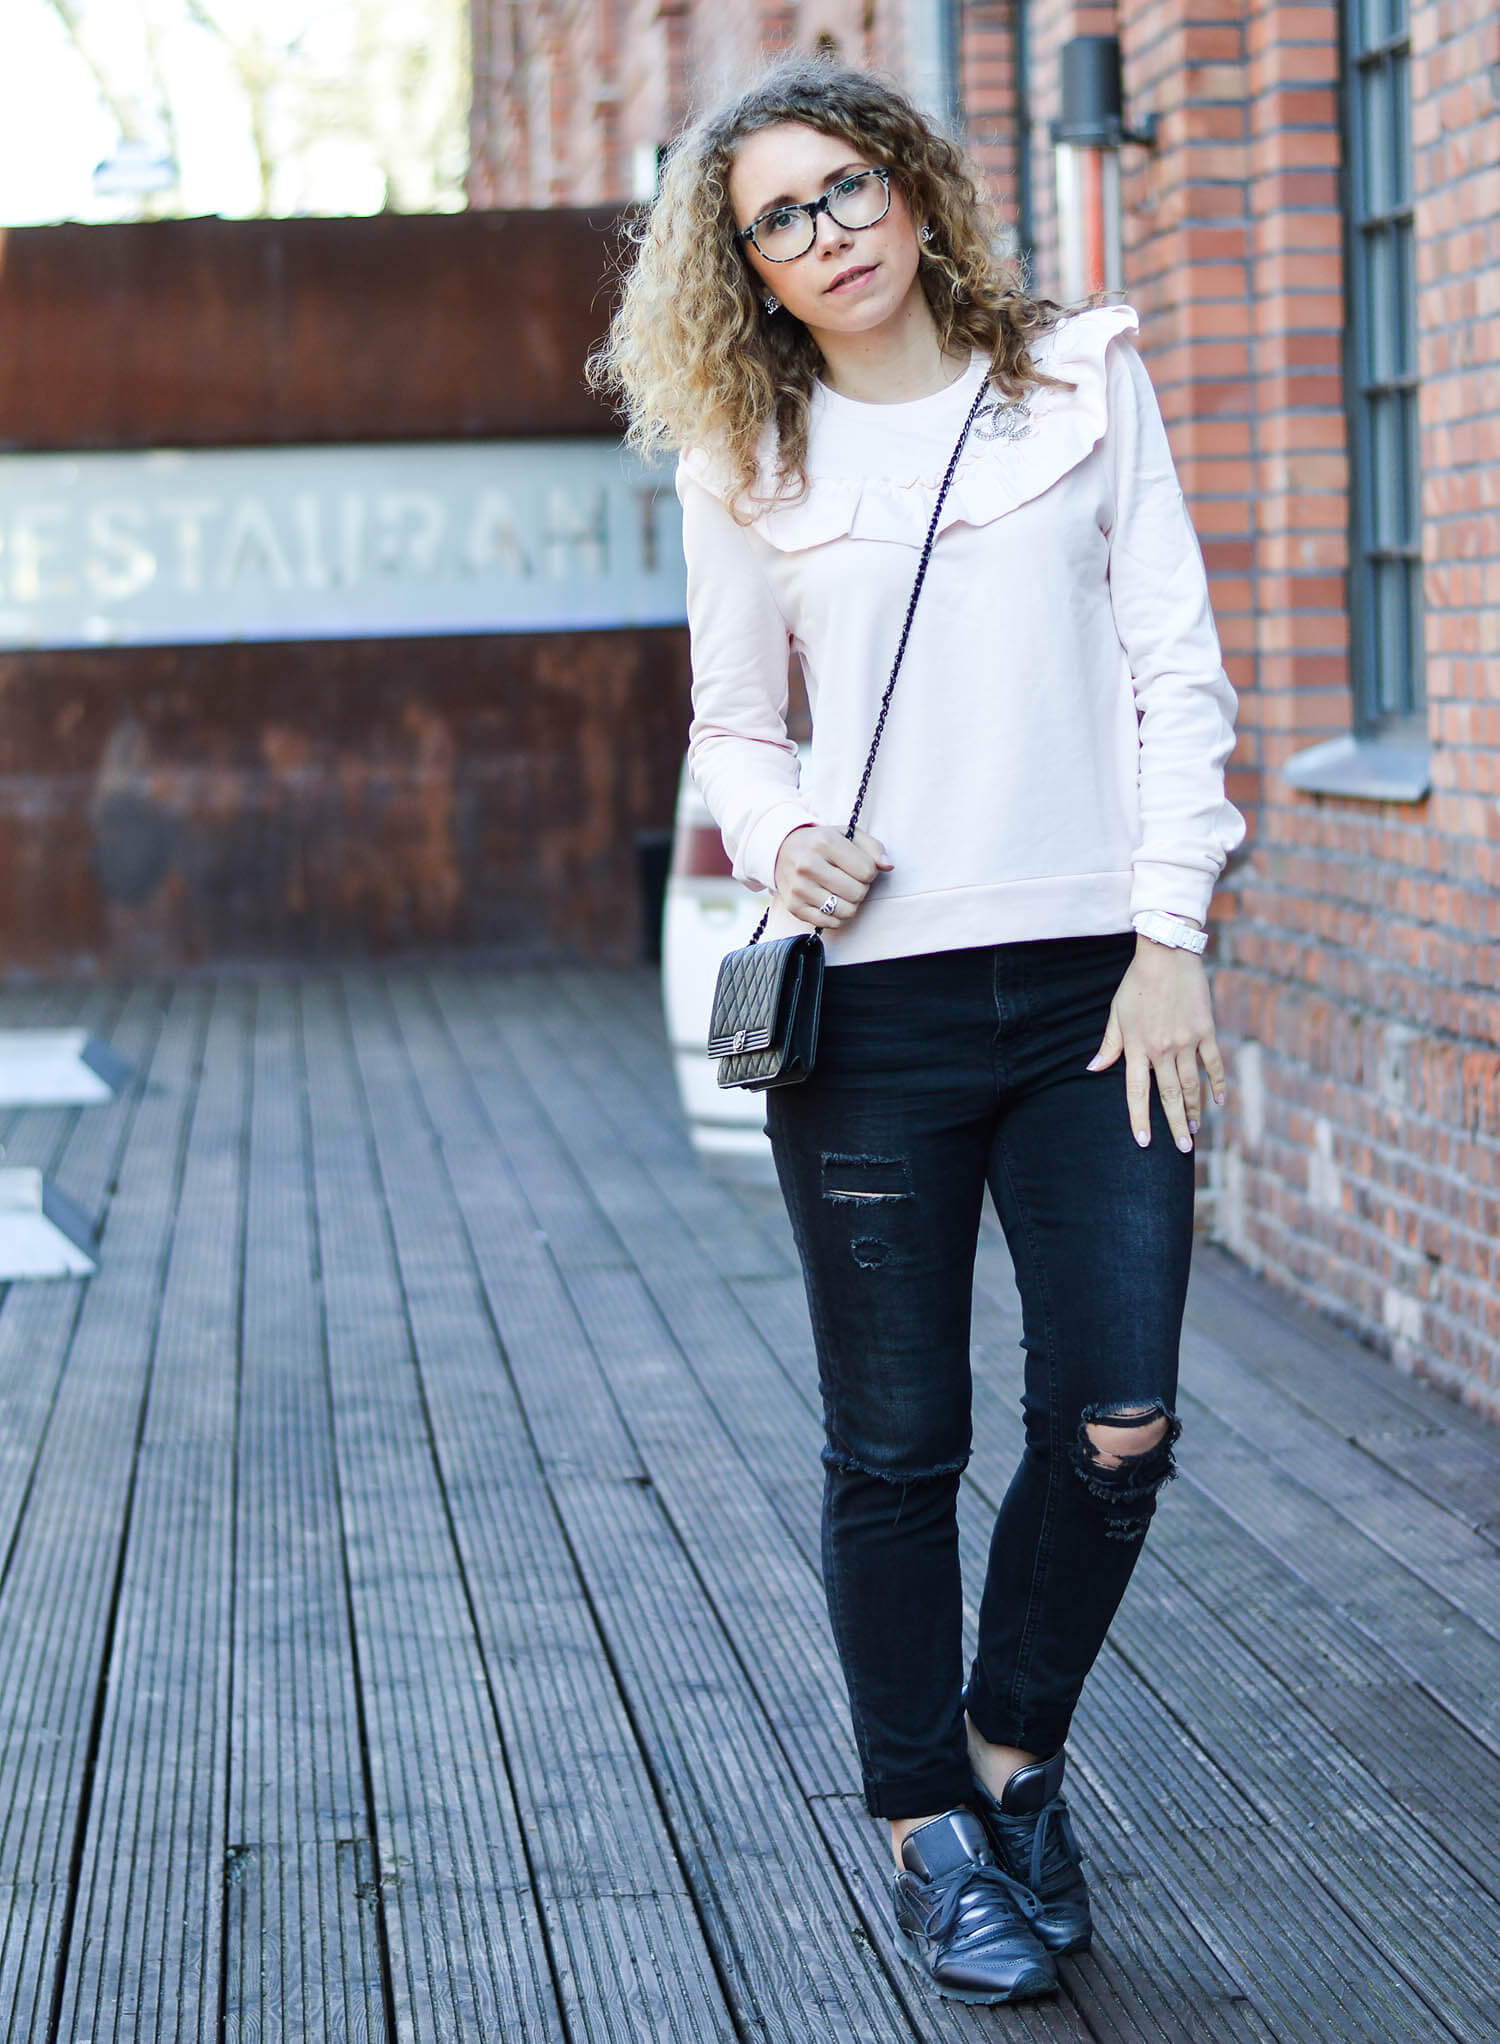 Kationette-fashionblog-nrw-Outfit-Volant-Sweater-Ripped-Jeans-Chanel-Boy-WOC-berlin